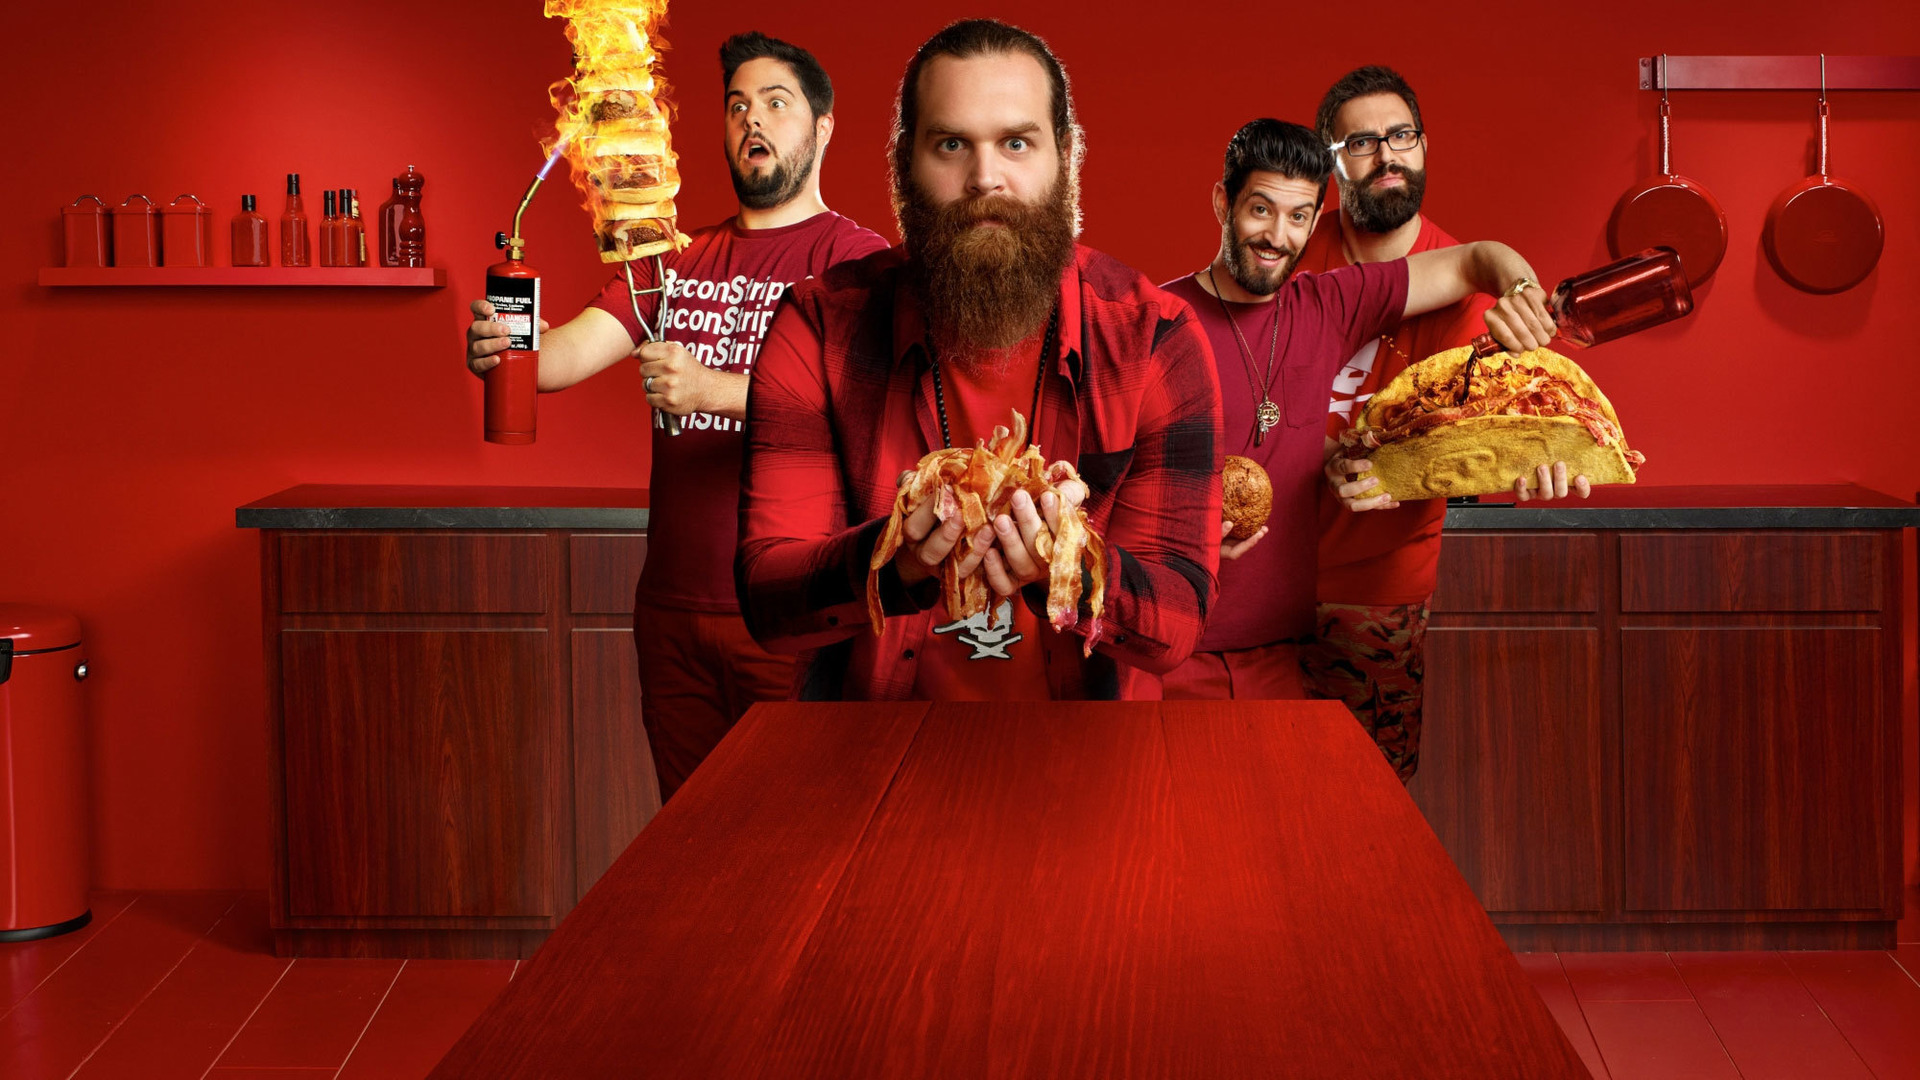 Show Epic Meal Empire